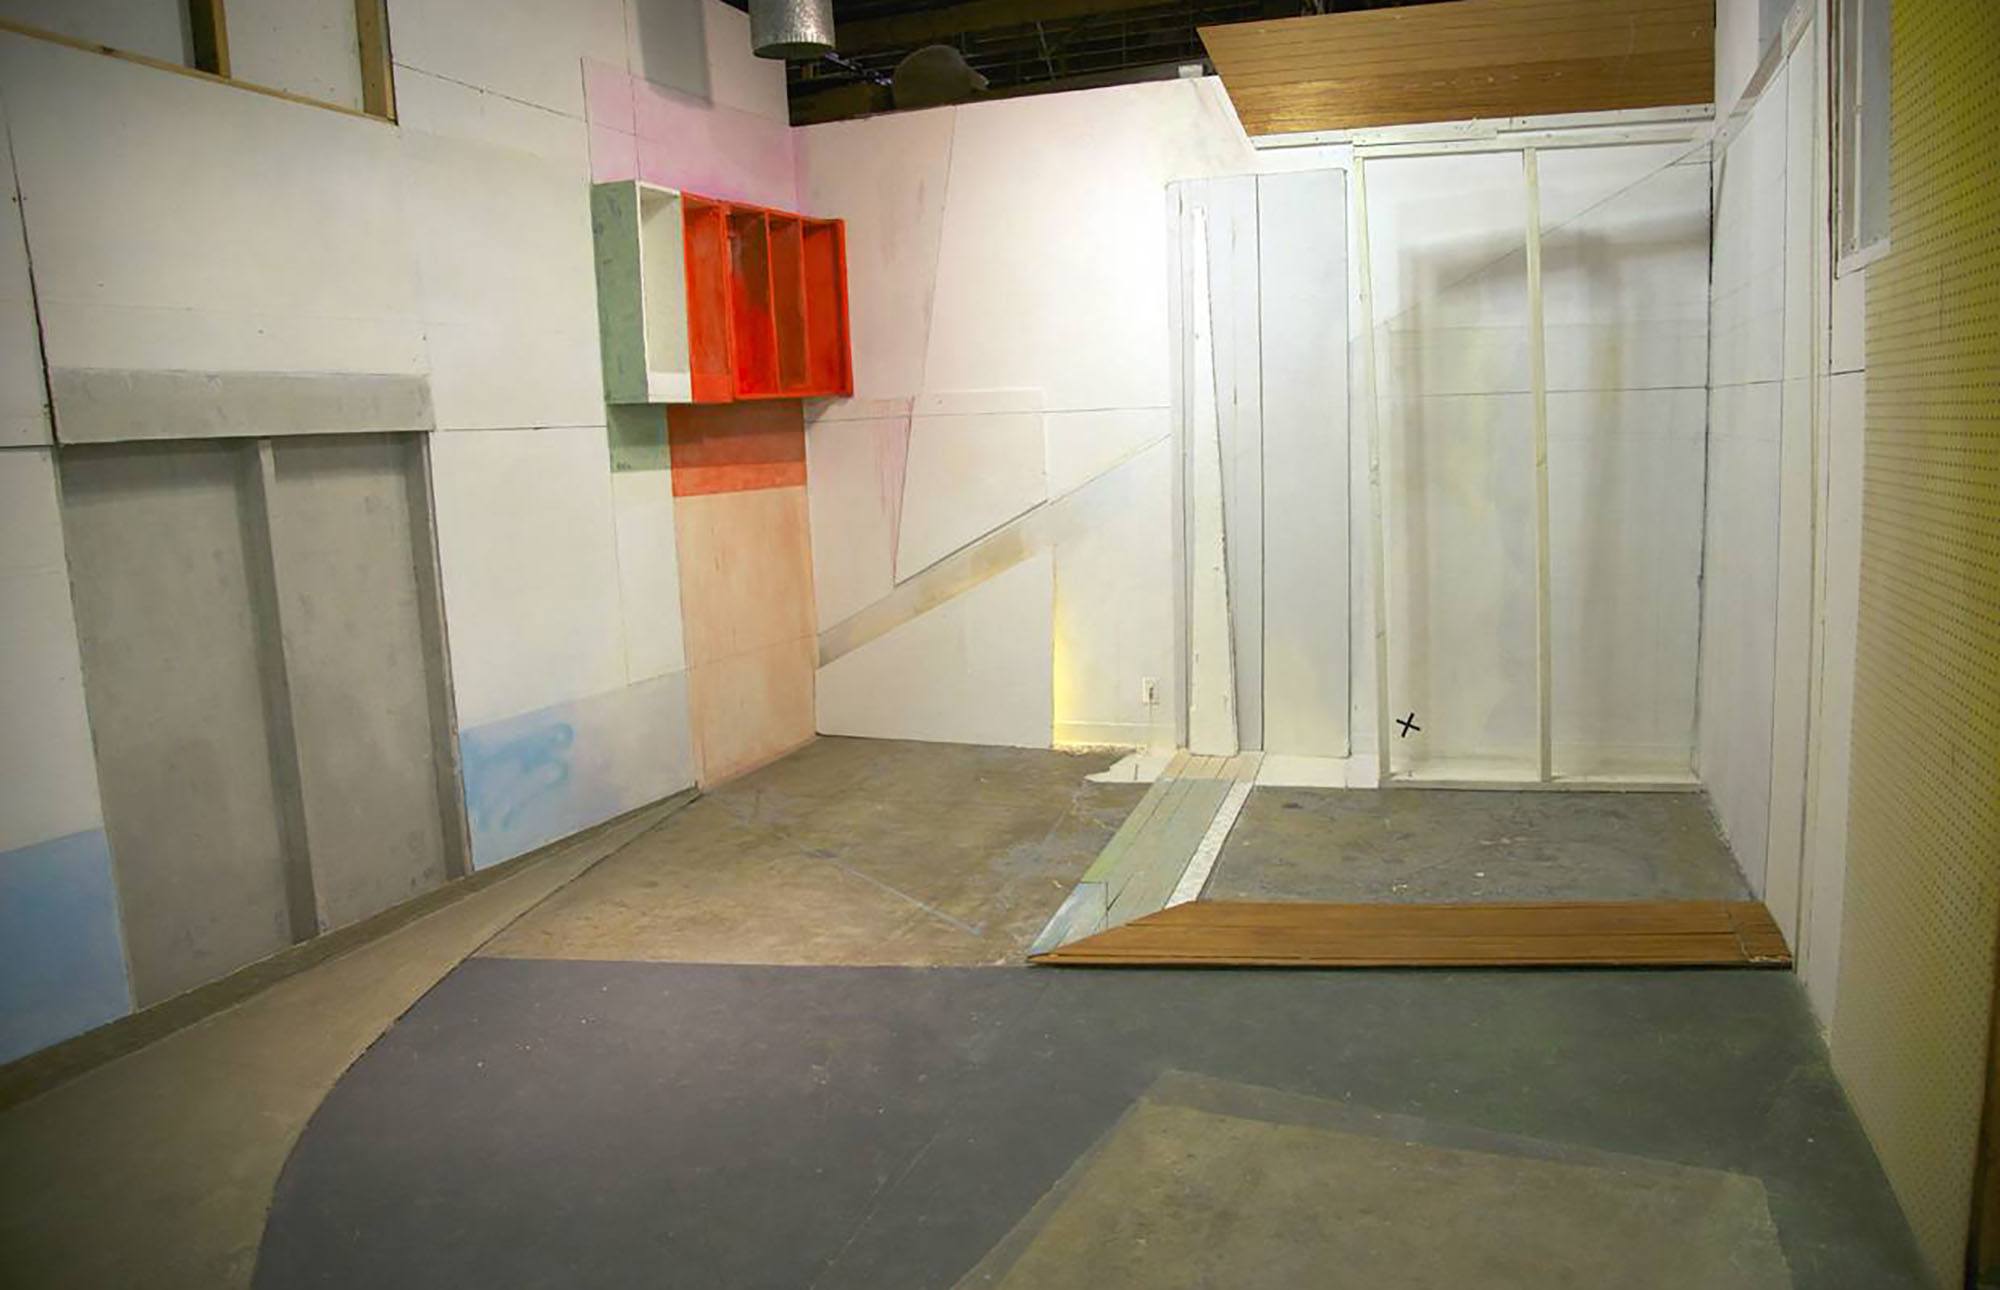 An installation image of a gallery space with architectural elements added and cut from the walls